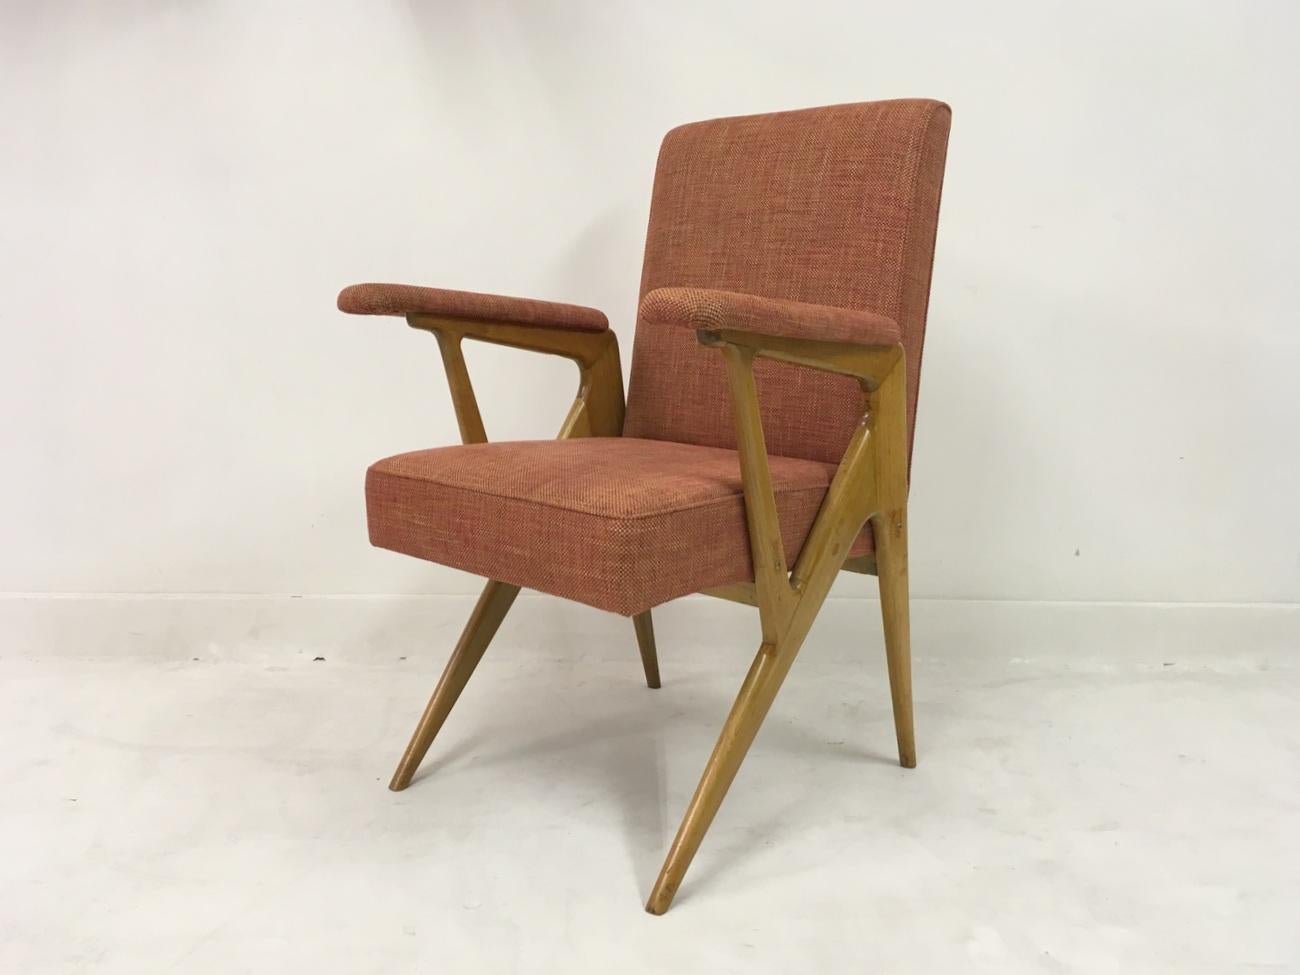 Geometric shaped armchair
New upholstery
Probably Italian,
1950s
Measures: Seat height 46cm.